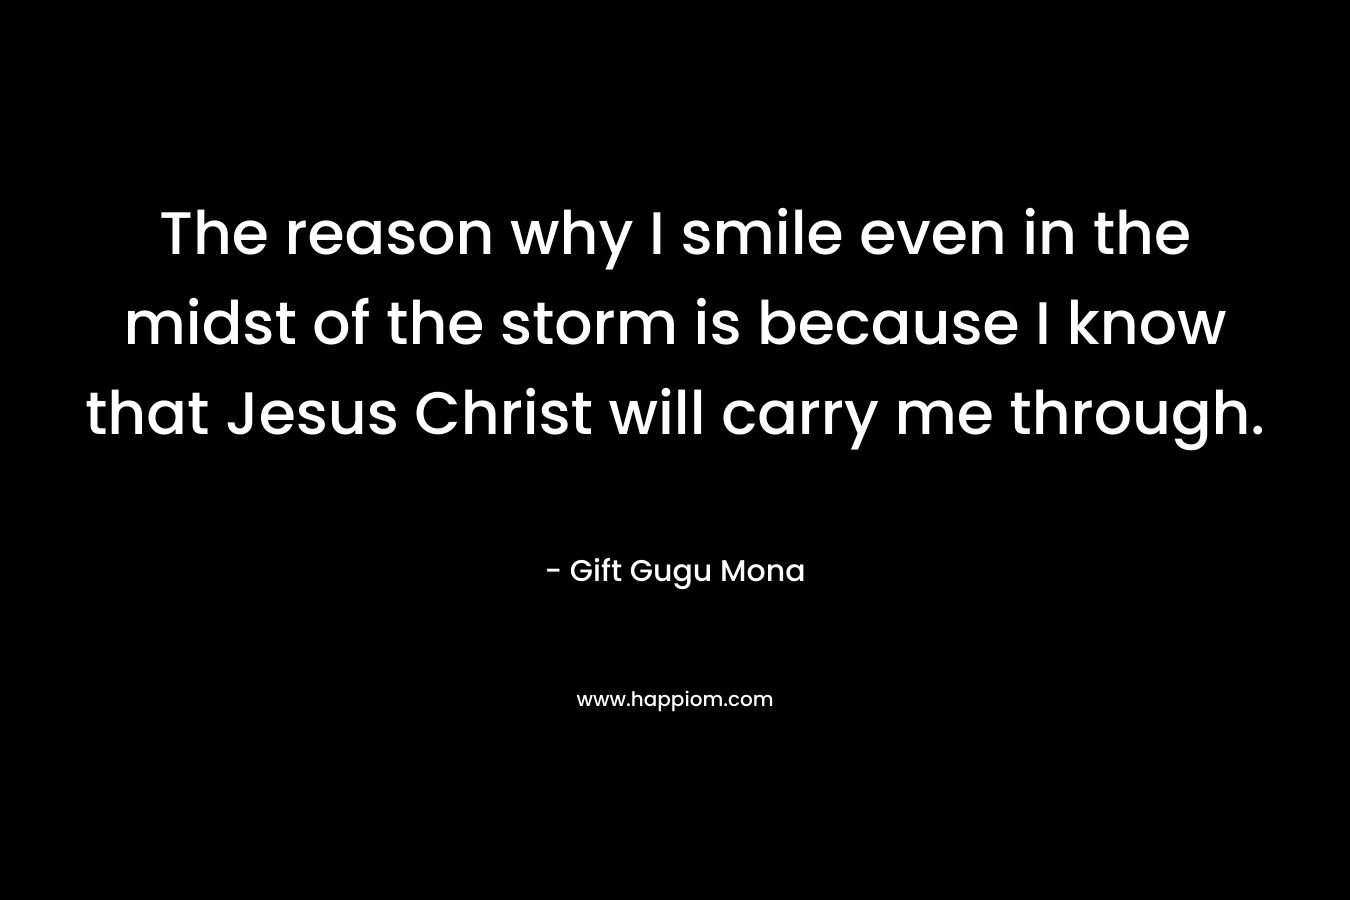 The reason why I smile even in the midst of the storm is because I know that Jesus Christ will carry me through.